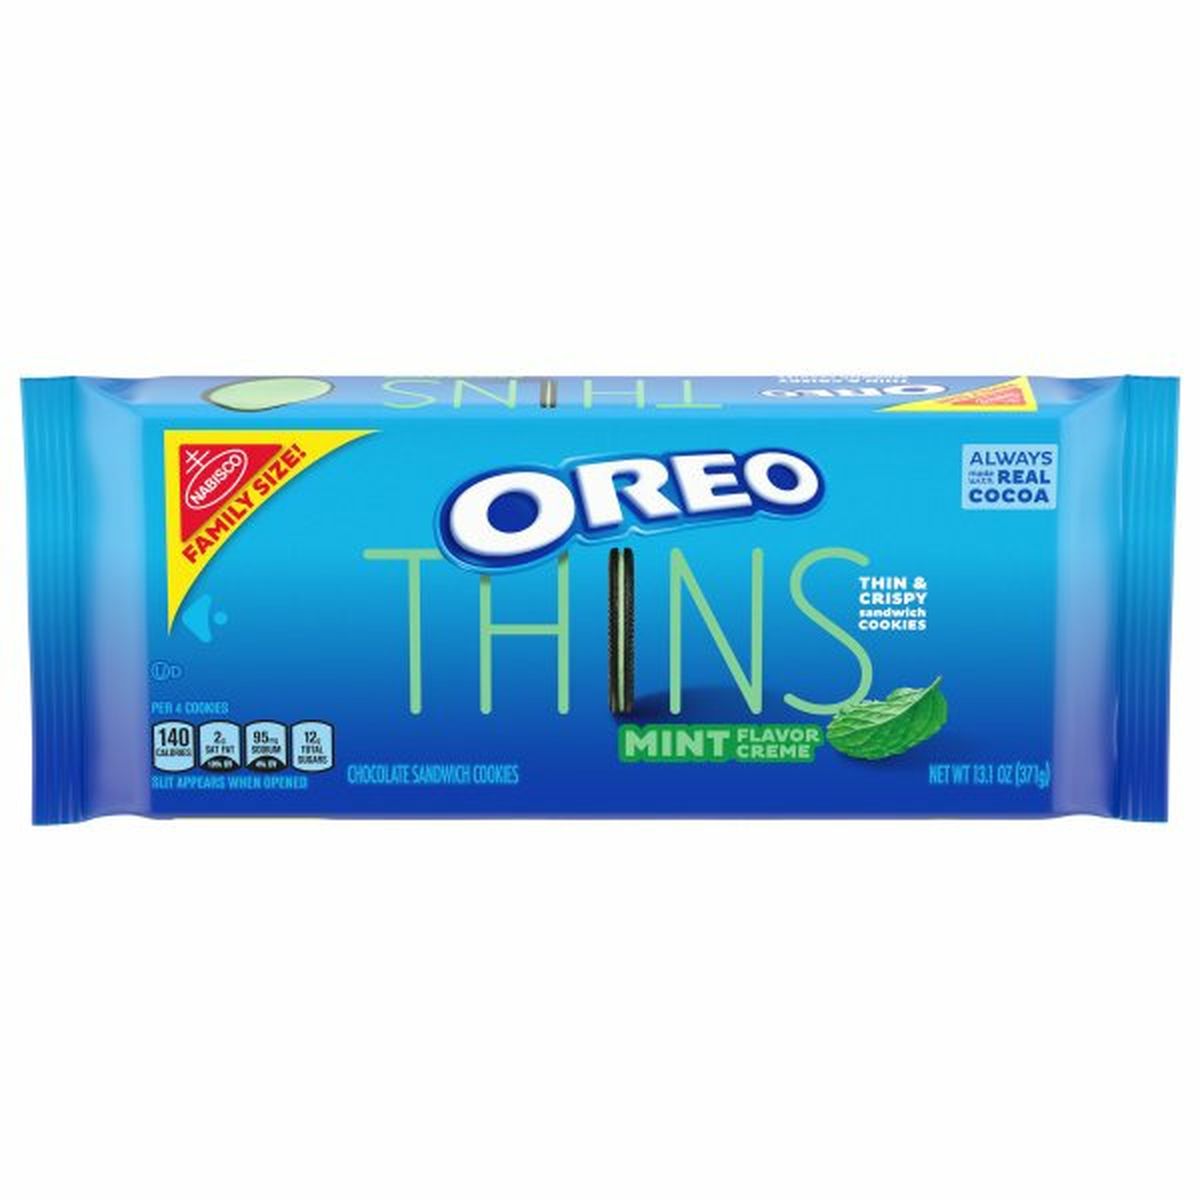 Calories in Oreo Thins Chocolate Sandwich Cookies, Mint Flavor Creme, Mint Flavor Creme, Family Size